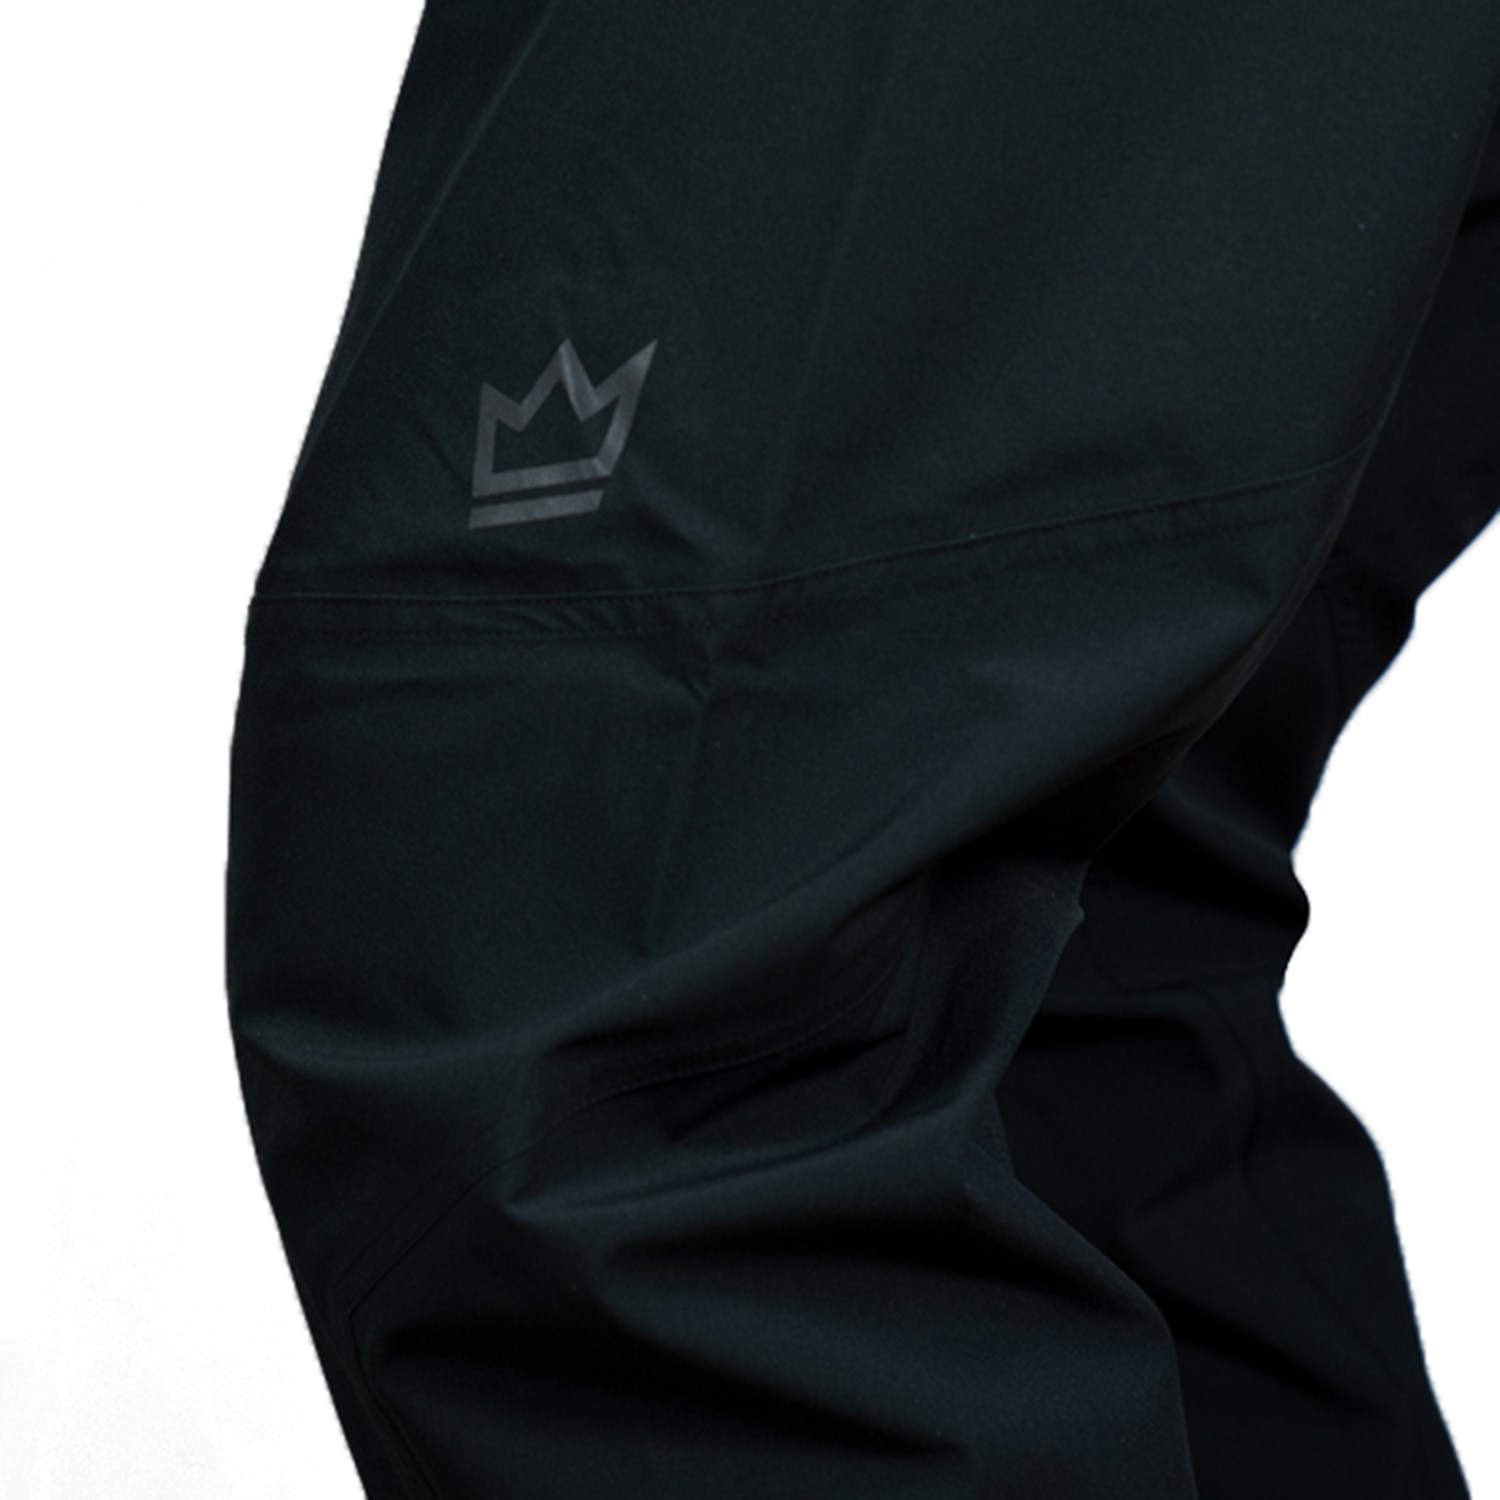 Tested  Petes Royal Racing Storm Waterproof Trousers Review